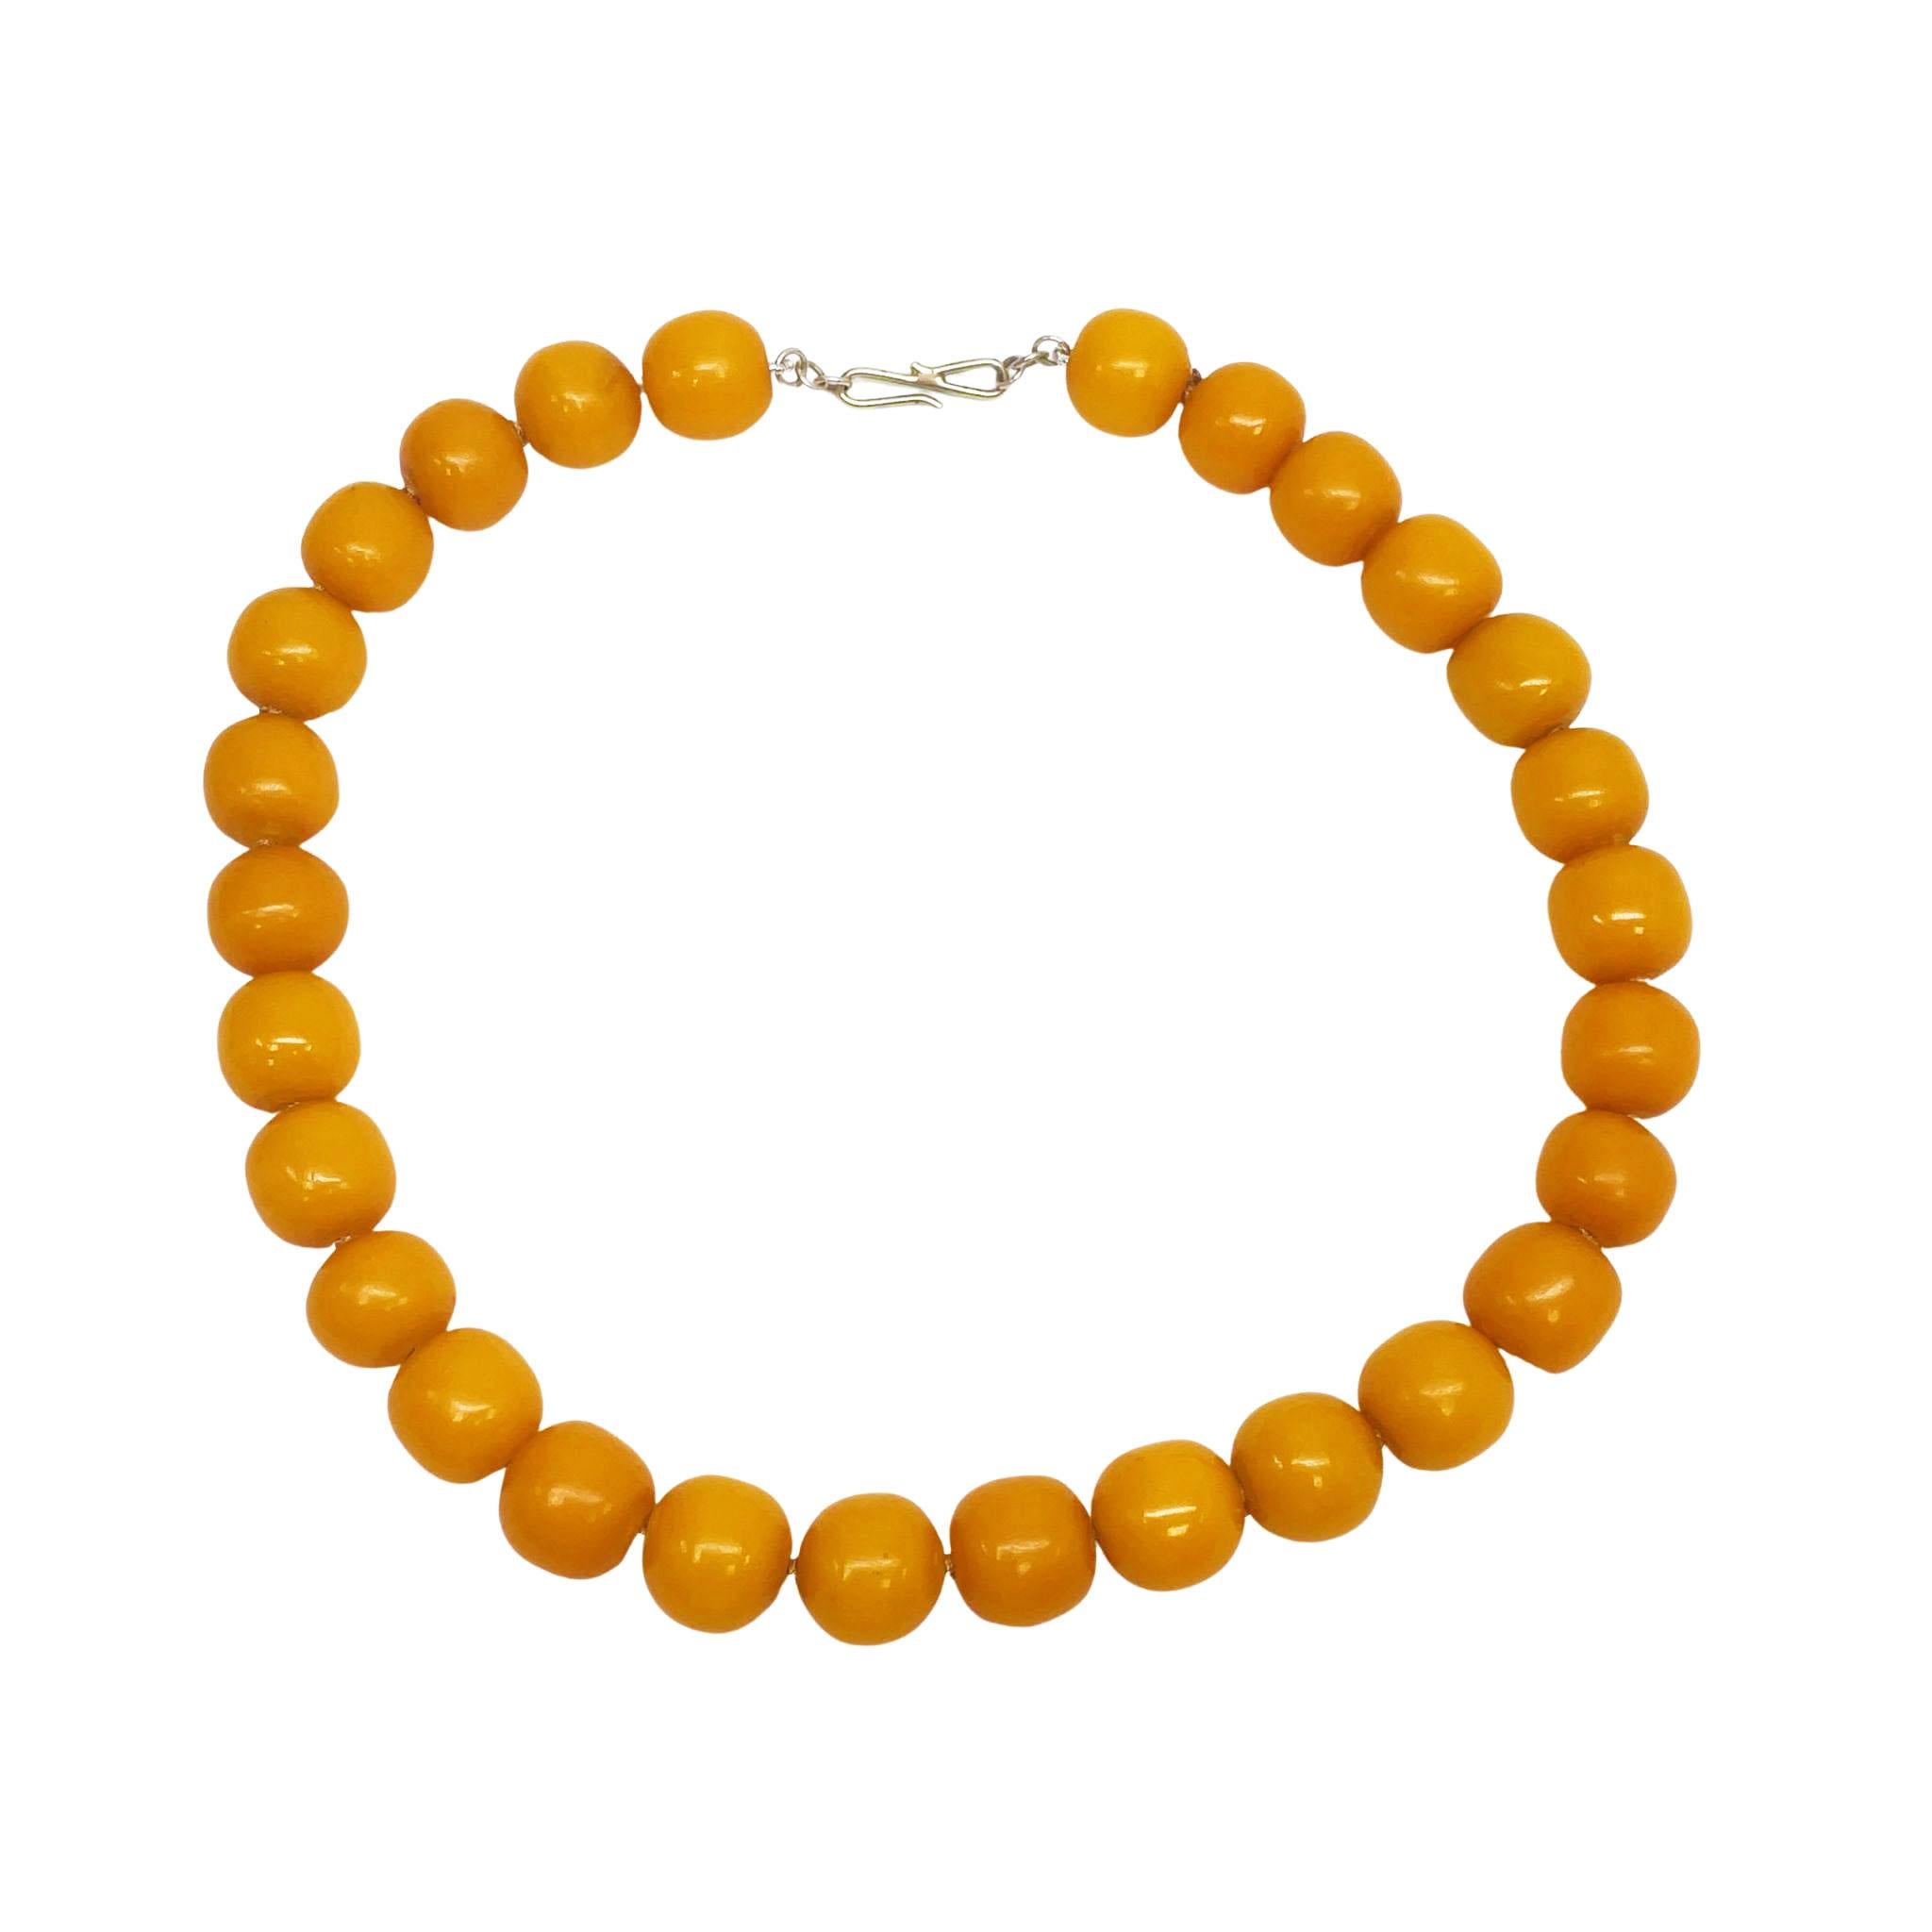 This is an absolutely delicious Butterscotch Amber beaded necklace dating back to the Victorian era! This necklace is 17